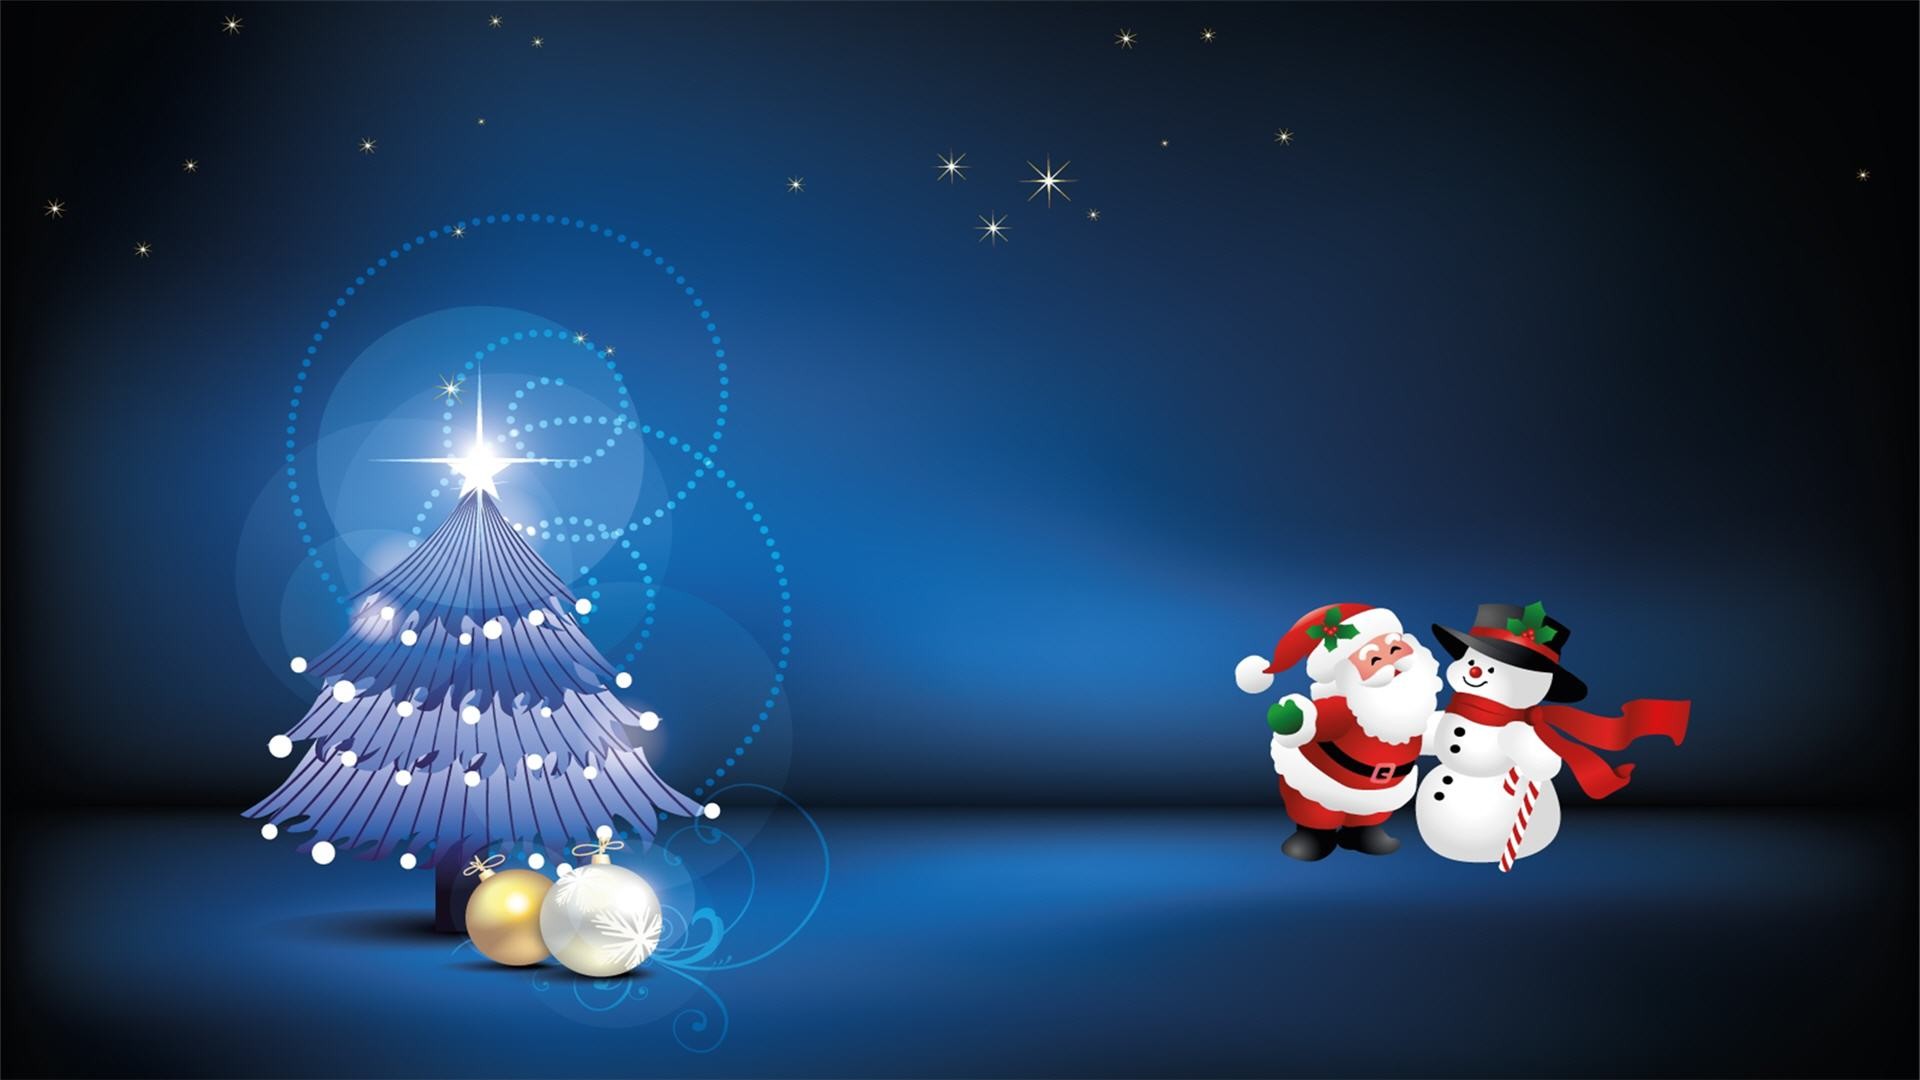 1920x1080 HDWP Christmas Wallpapers Christmas Collection of Widescreen